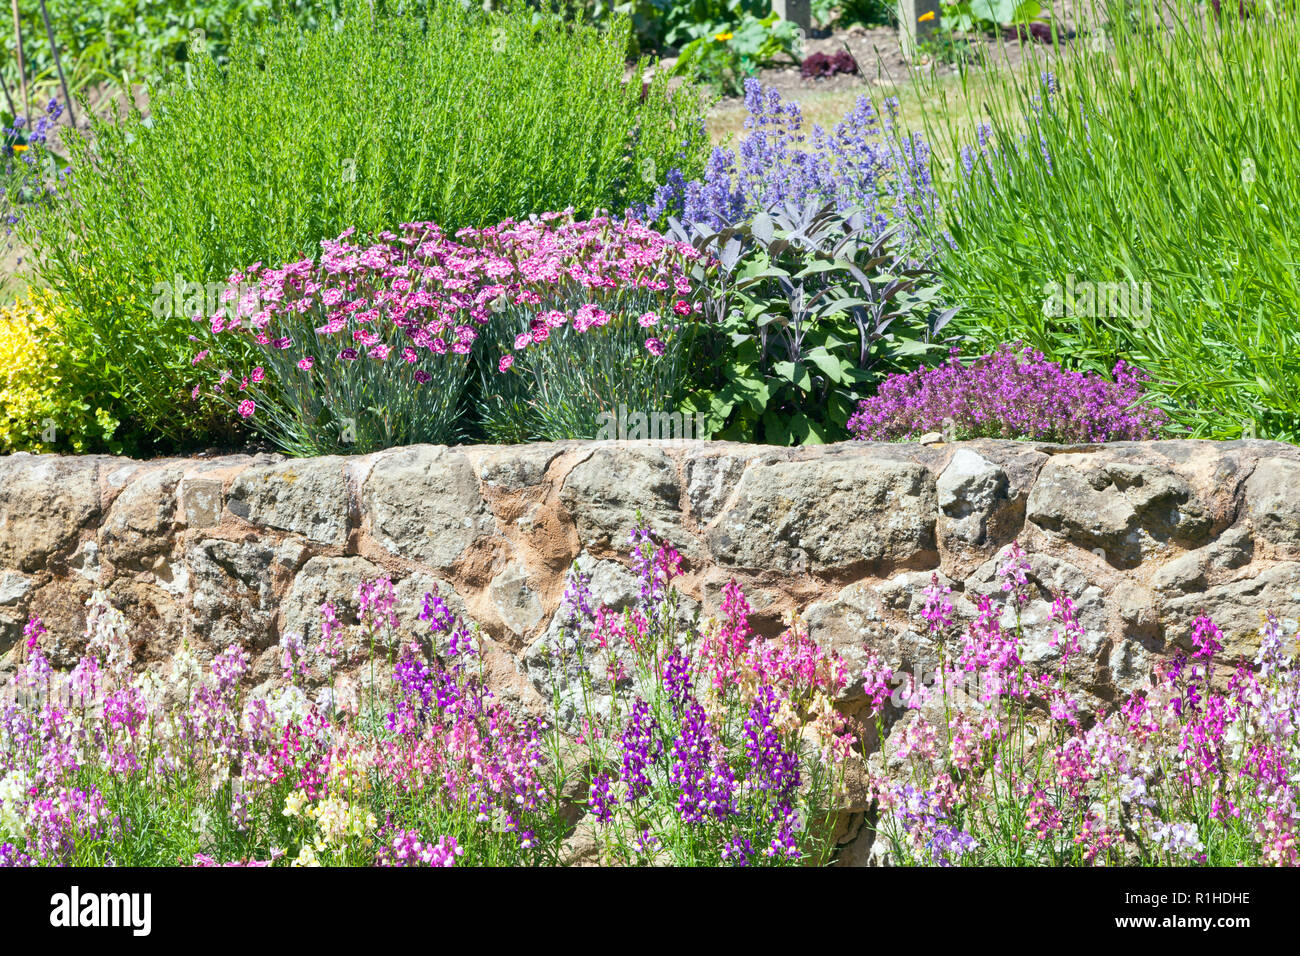 Pink, blue flowers in bloom by a stone wall in rockery garden, on a sunny summer day. Stock Photo